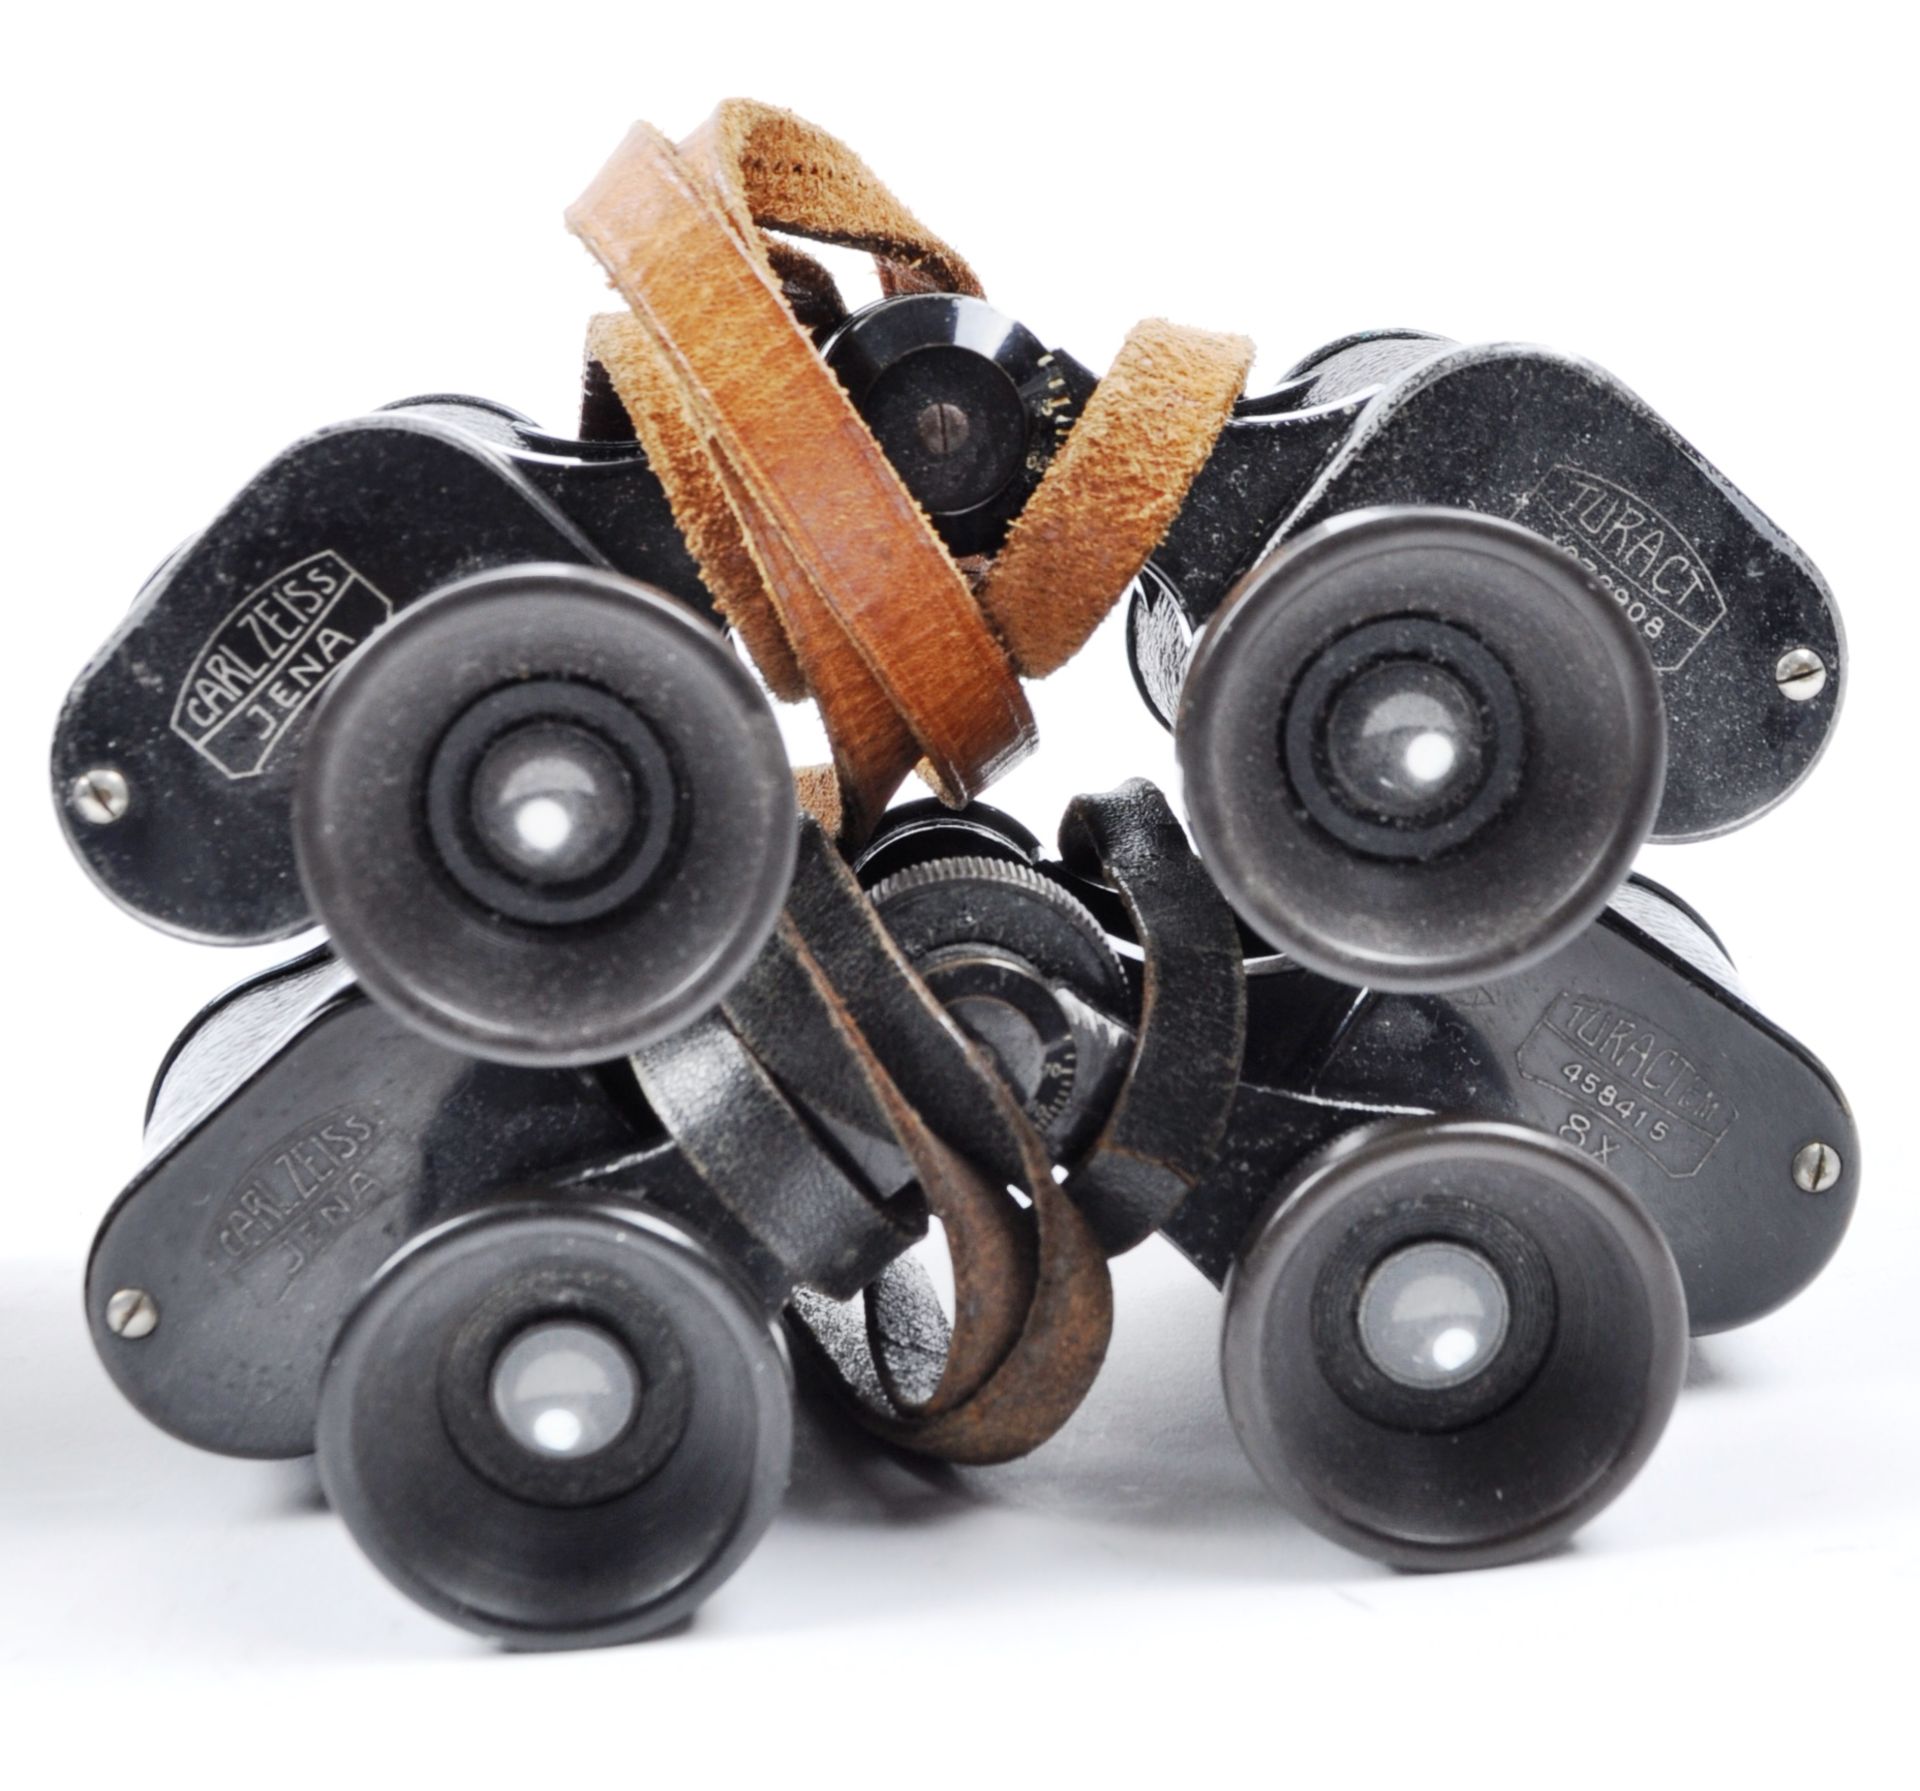 COLLECTION OF ROSS VINTAGE WARTIME BINOCULARS - Image 2 of 3